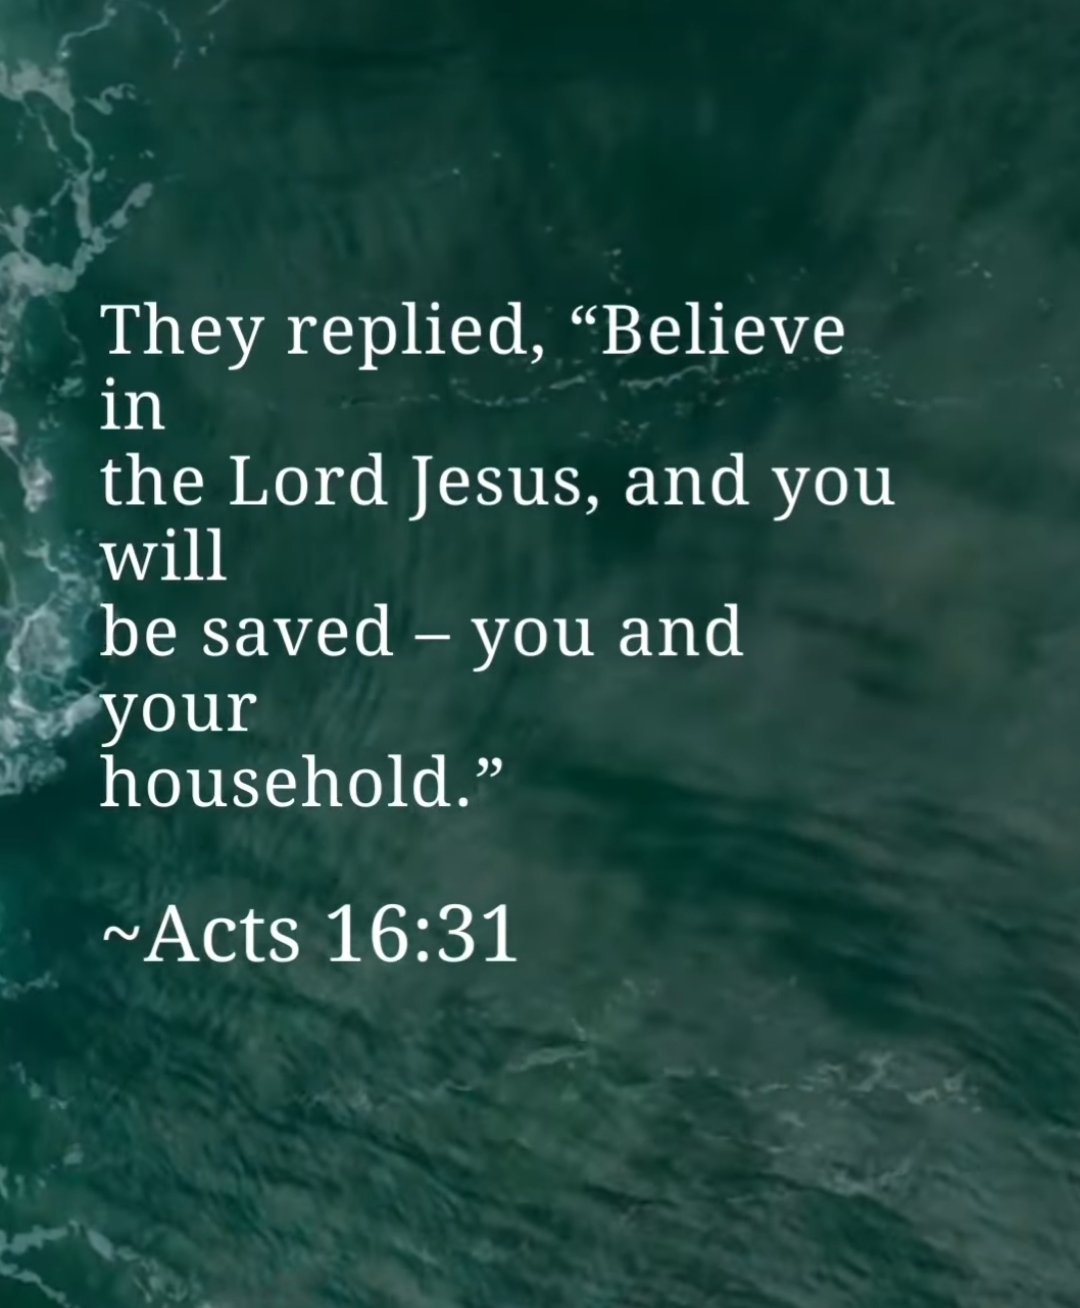 replied, "Believe in the Lord Jesus, and you will be saved you and your household " ~Acts 16.31 They